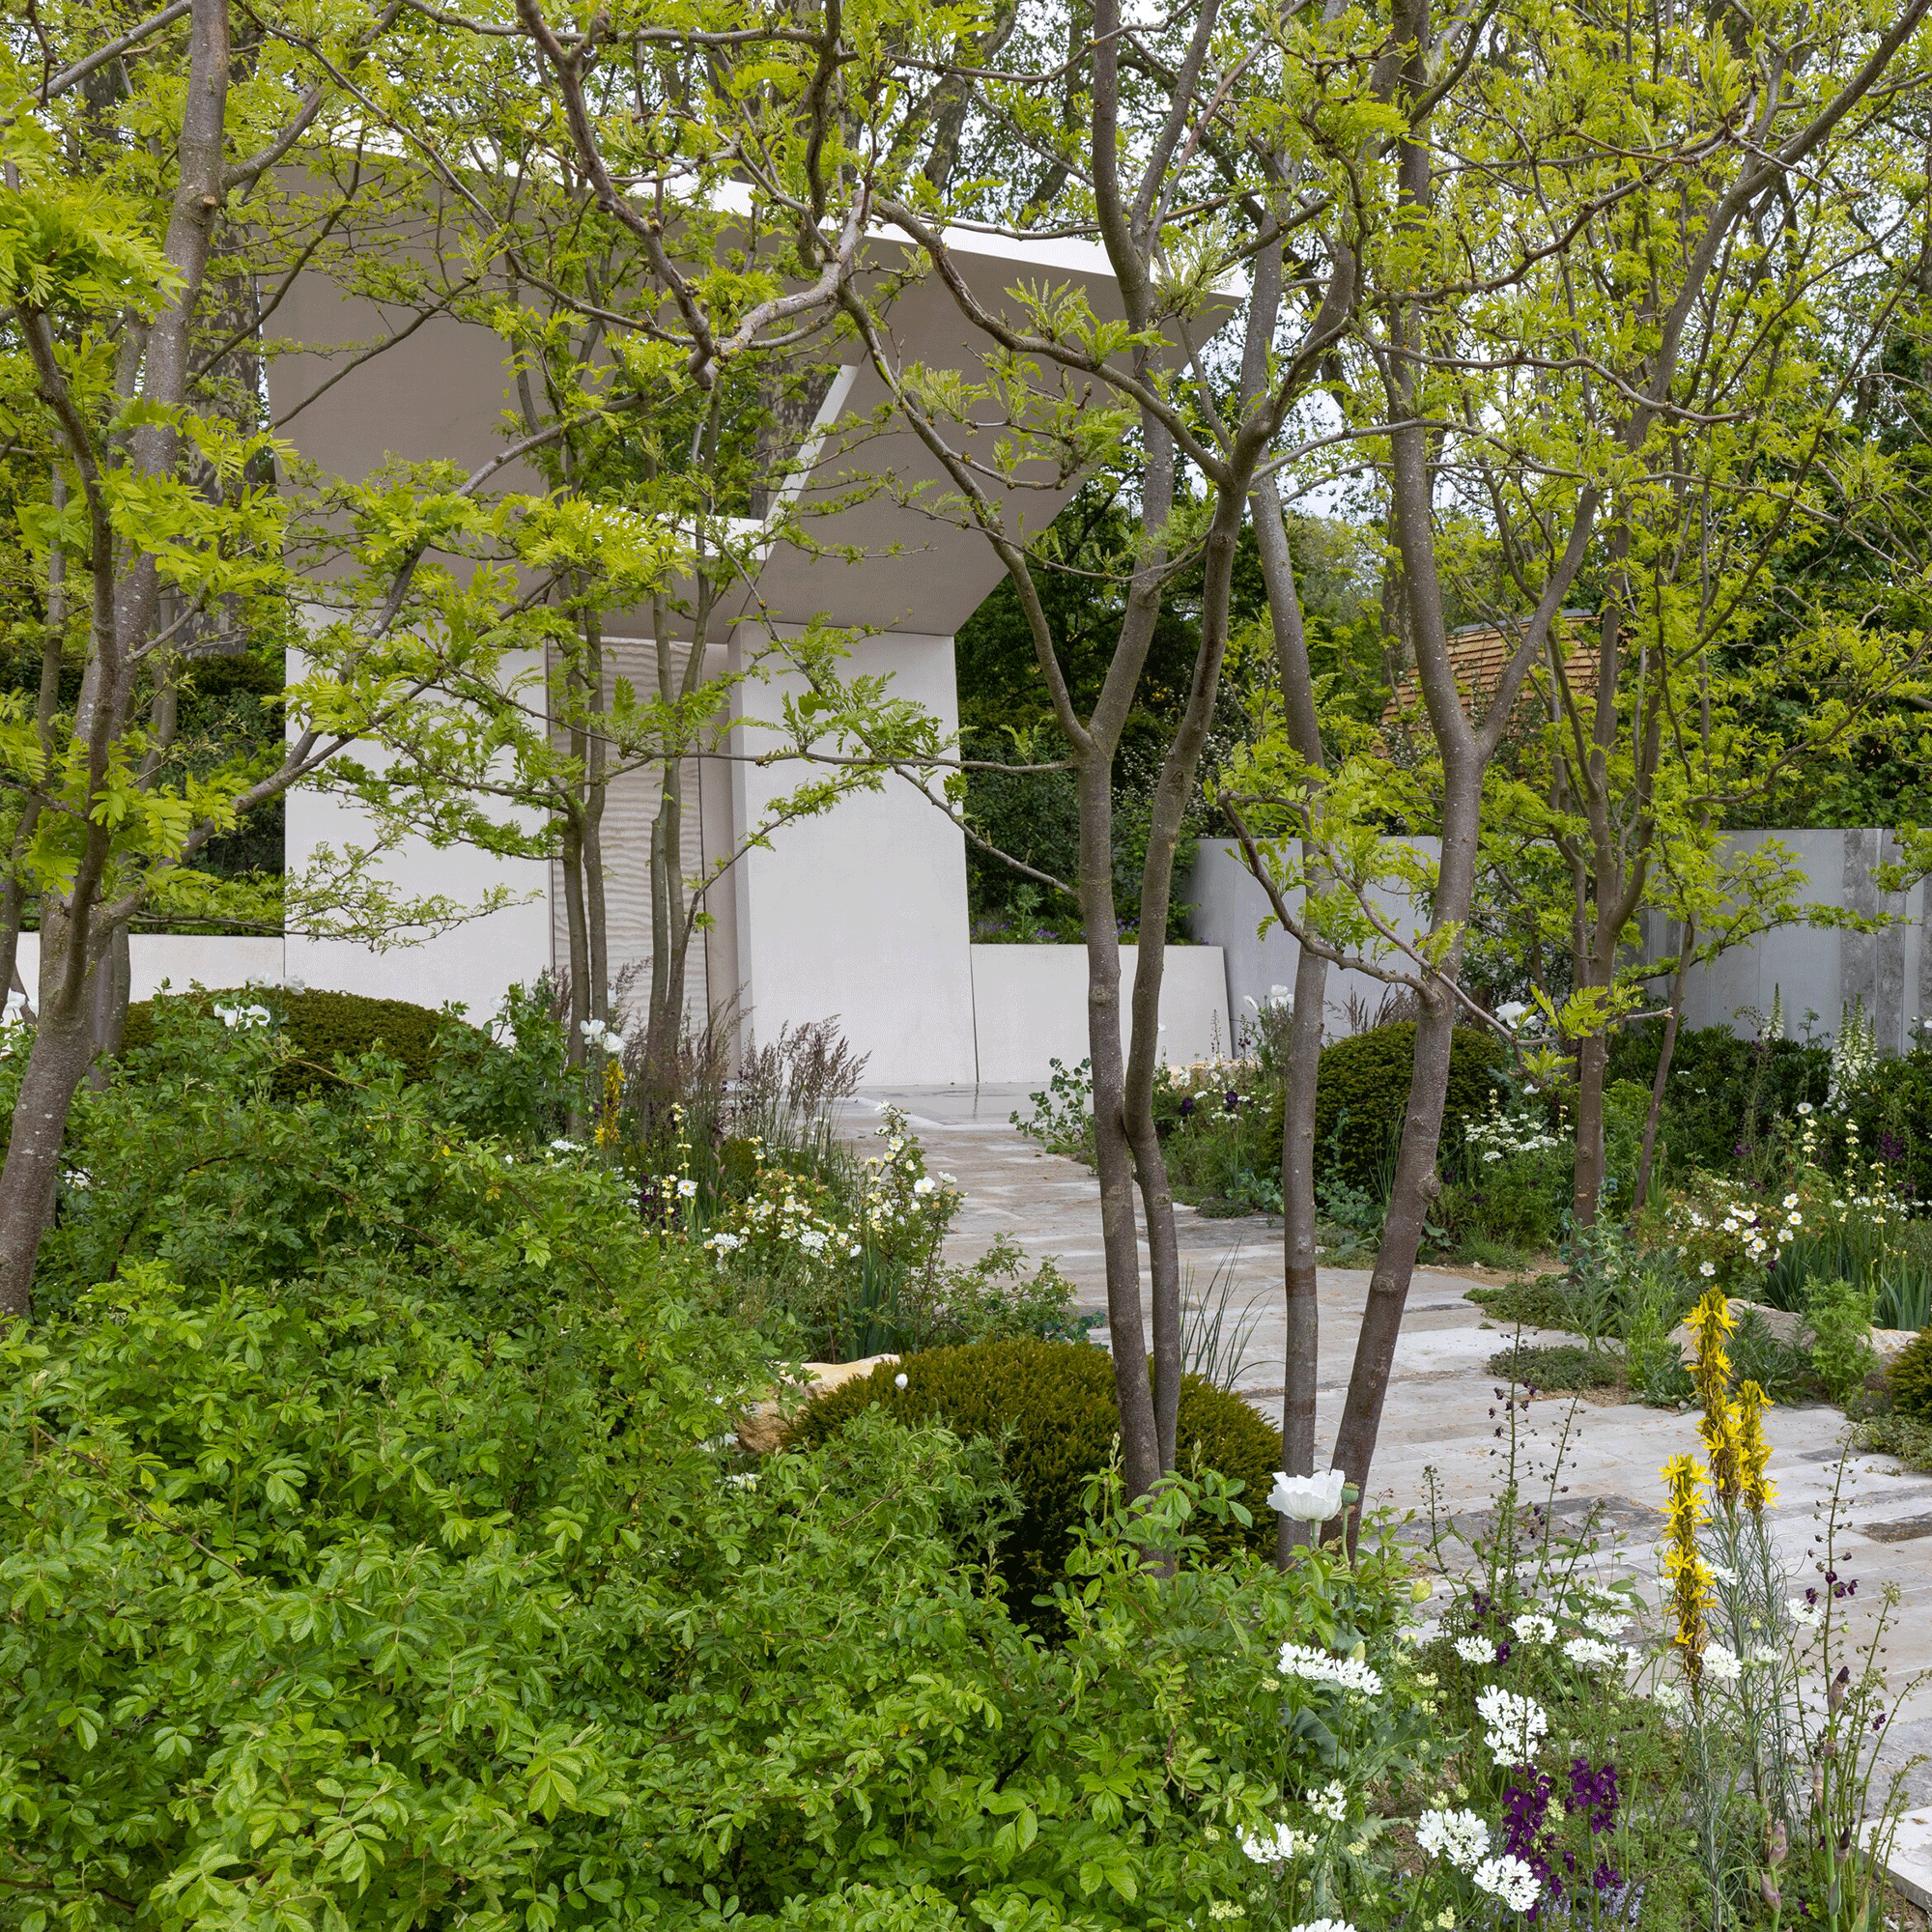 Garden with large white structure and pavement